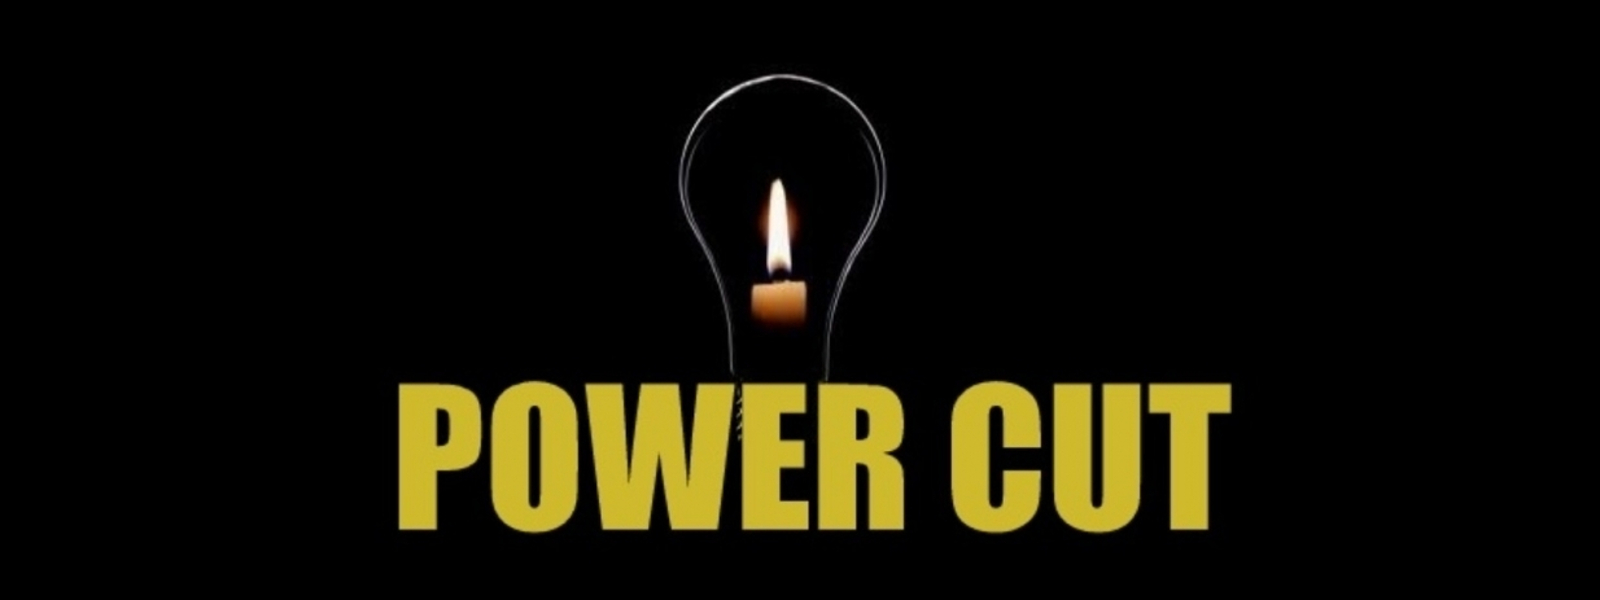 3-hour power cuts approved by PUCSL